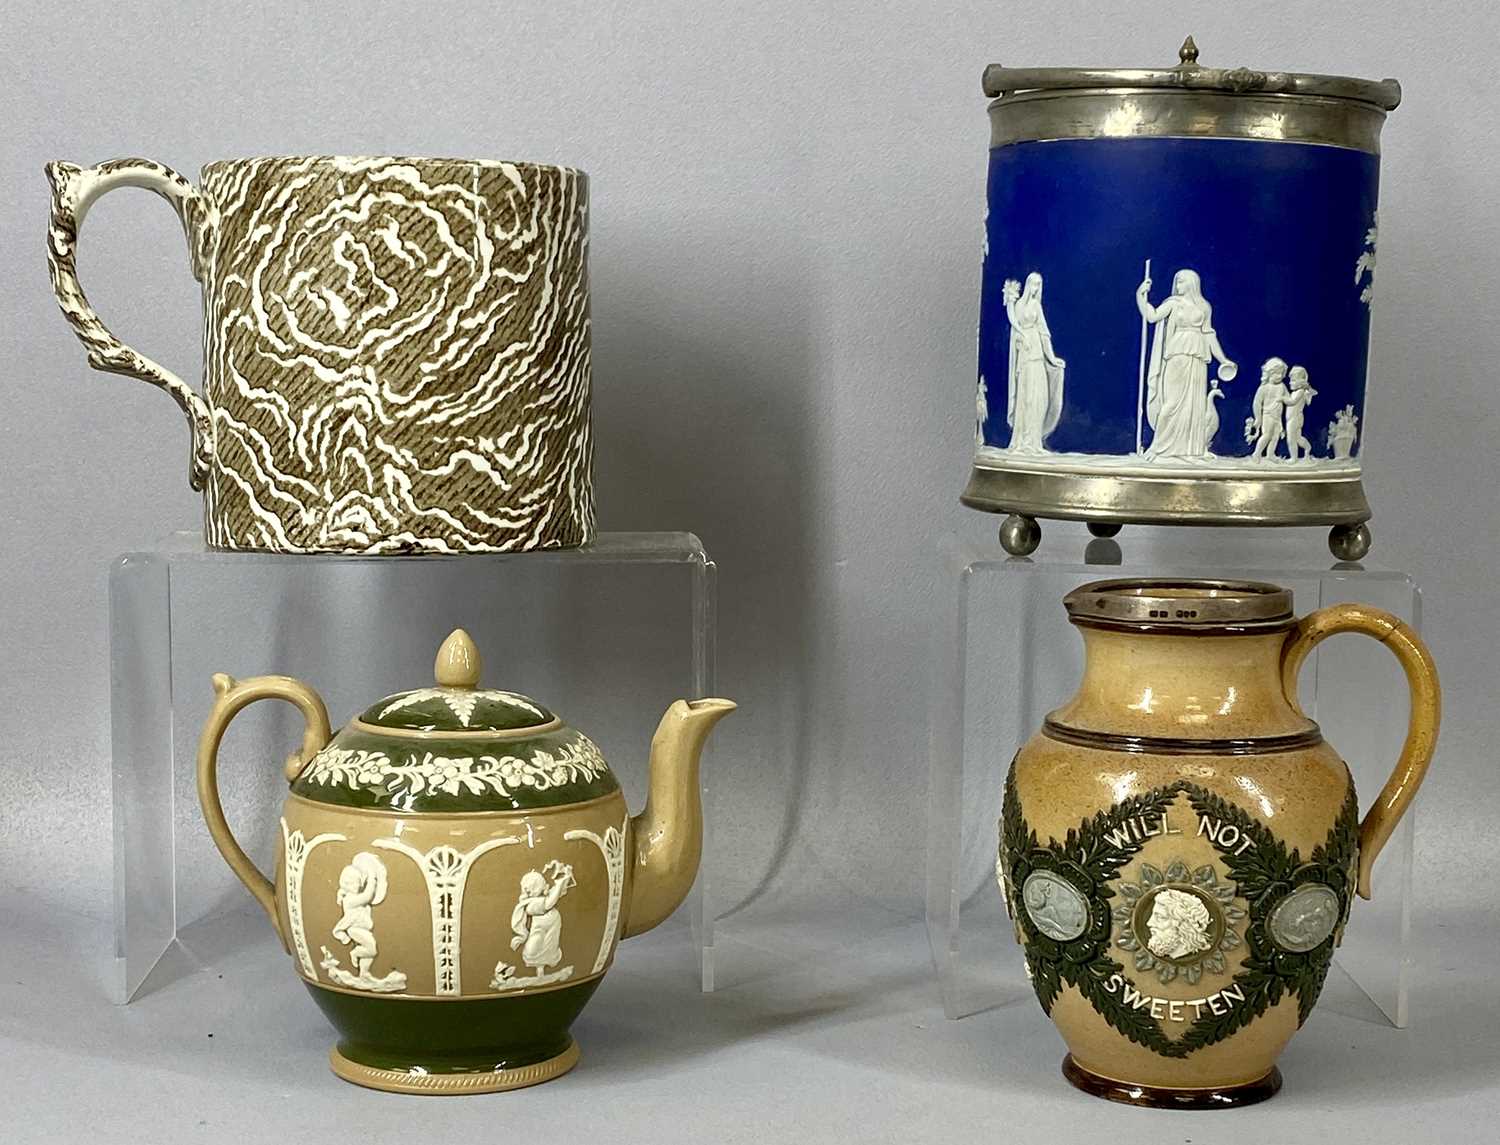 GROUP OF 19TH CENTURY CERAMICS, Doulton Lambeth stoneware motto jug, applied moulded decoration, "